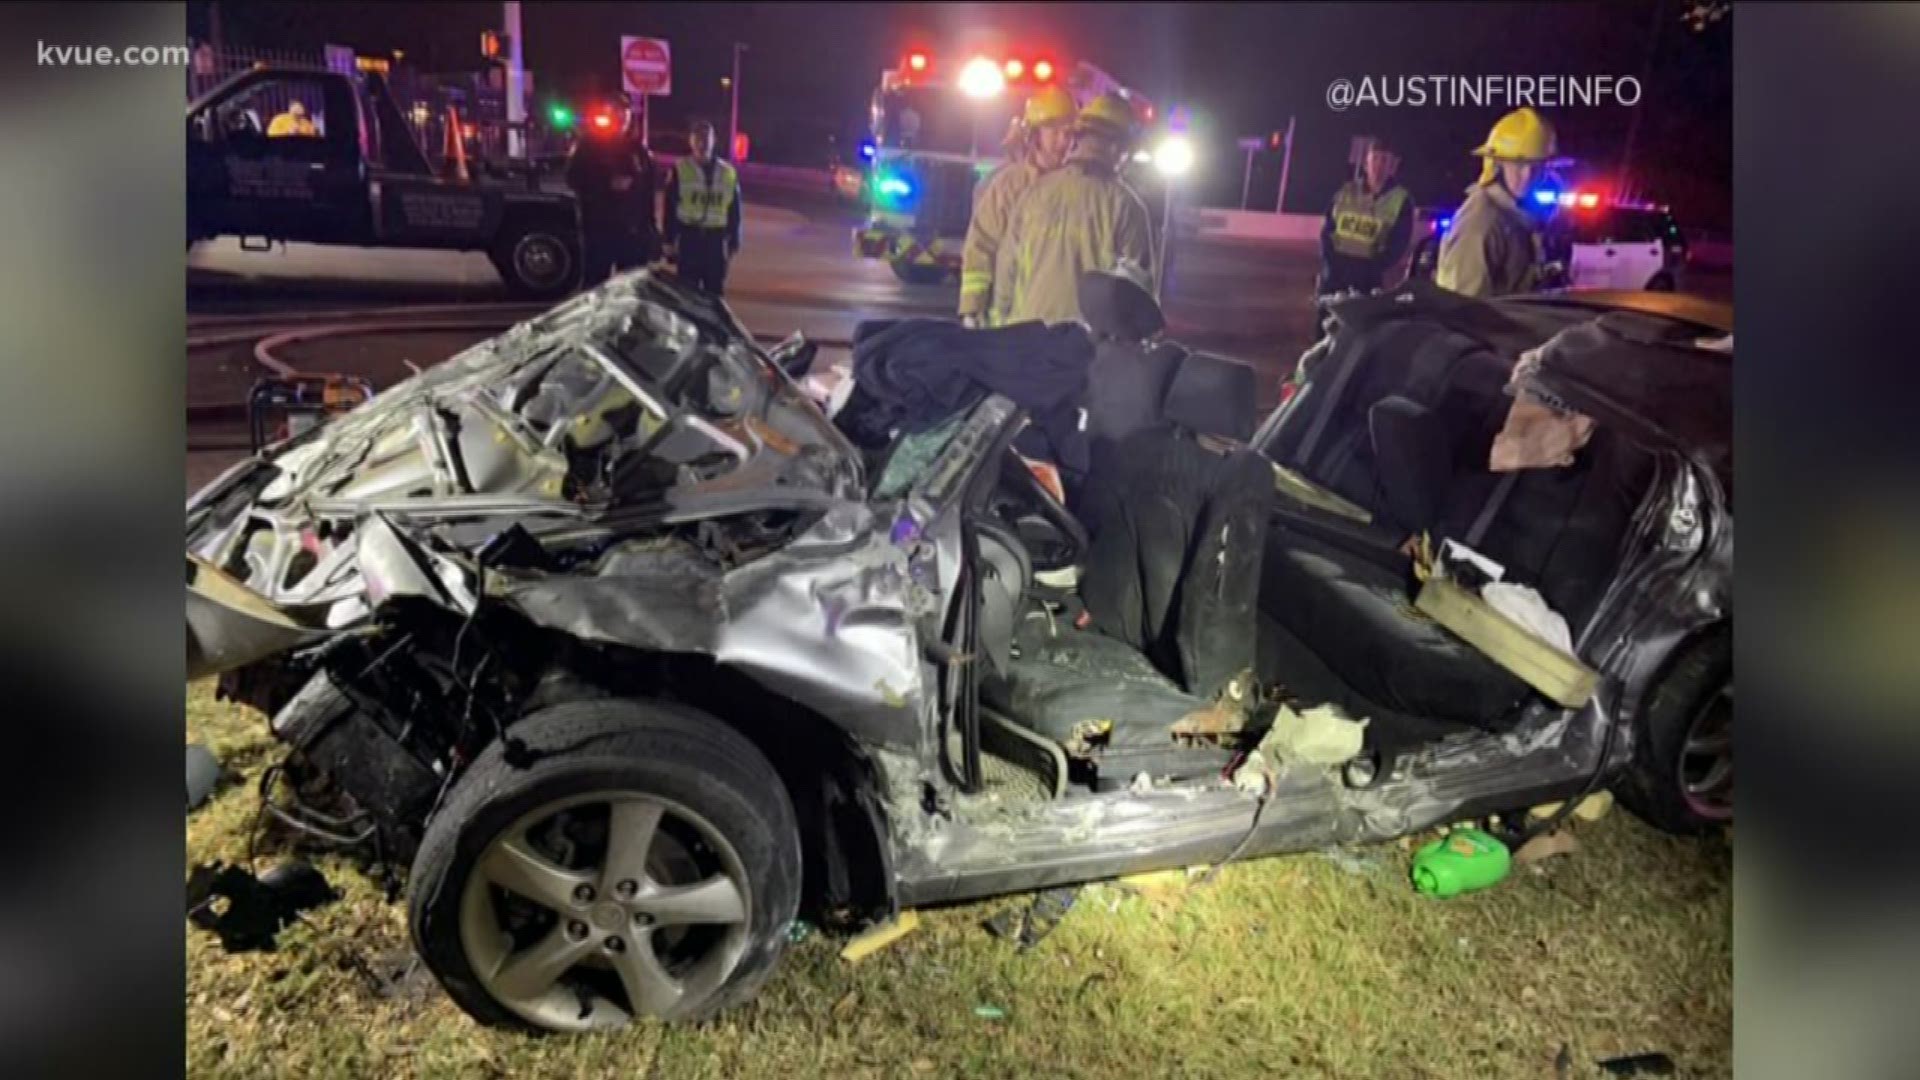 The crash happened near Interstate 35 and Woodward Street just after 4:30 a.m. Sunday.